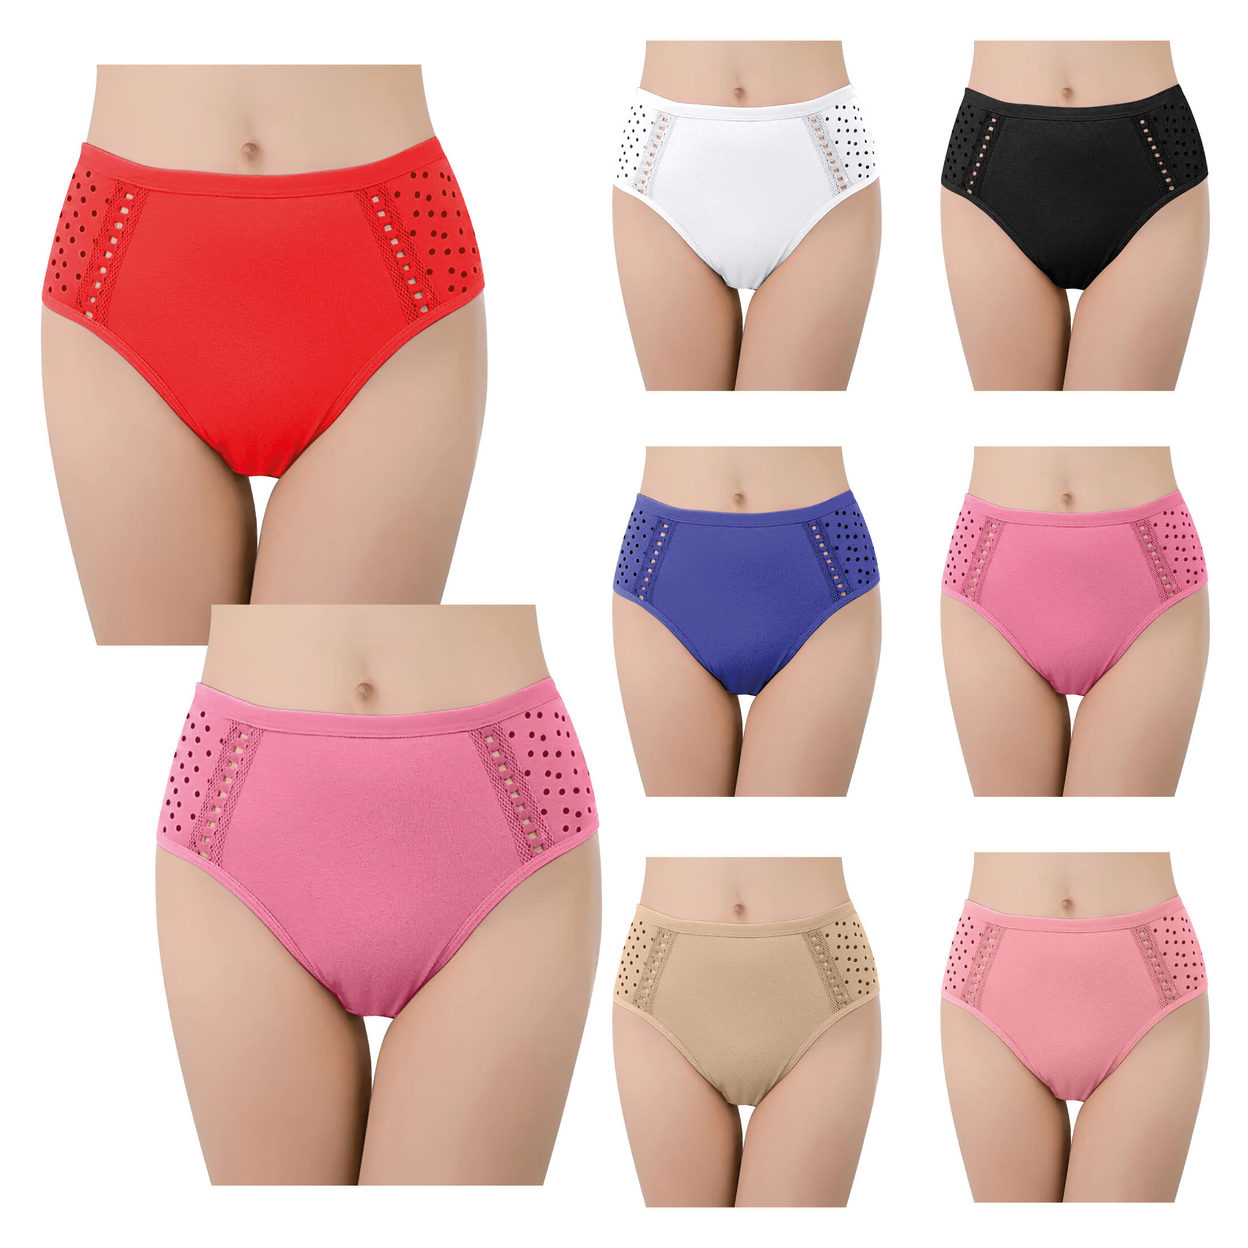 12-Pack: Women's Ultra Soft Moisture Wicking Panties Cotton Perfect Fit Underwear (Plus Sizes Available) - Xx-large